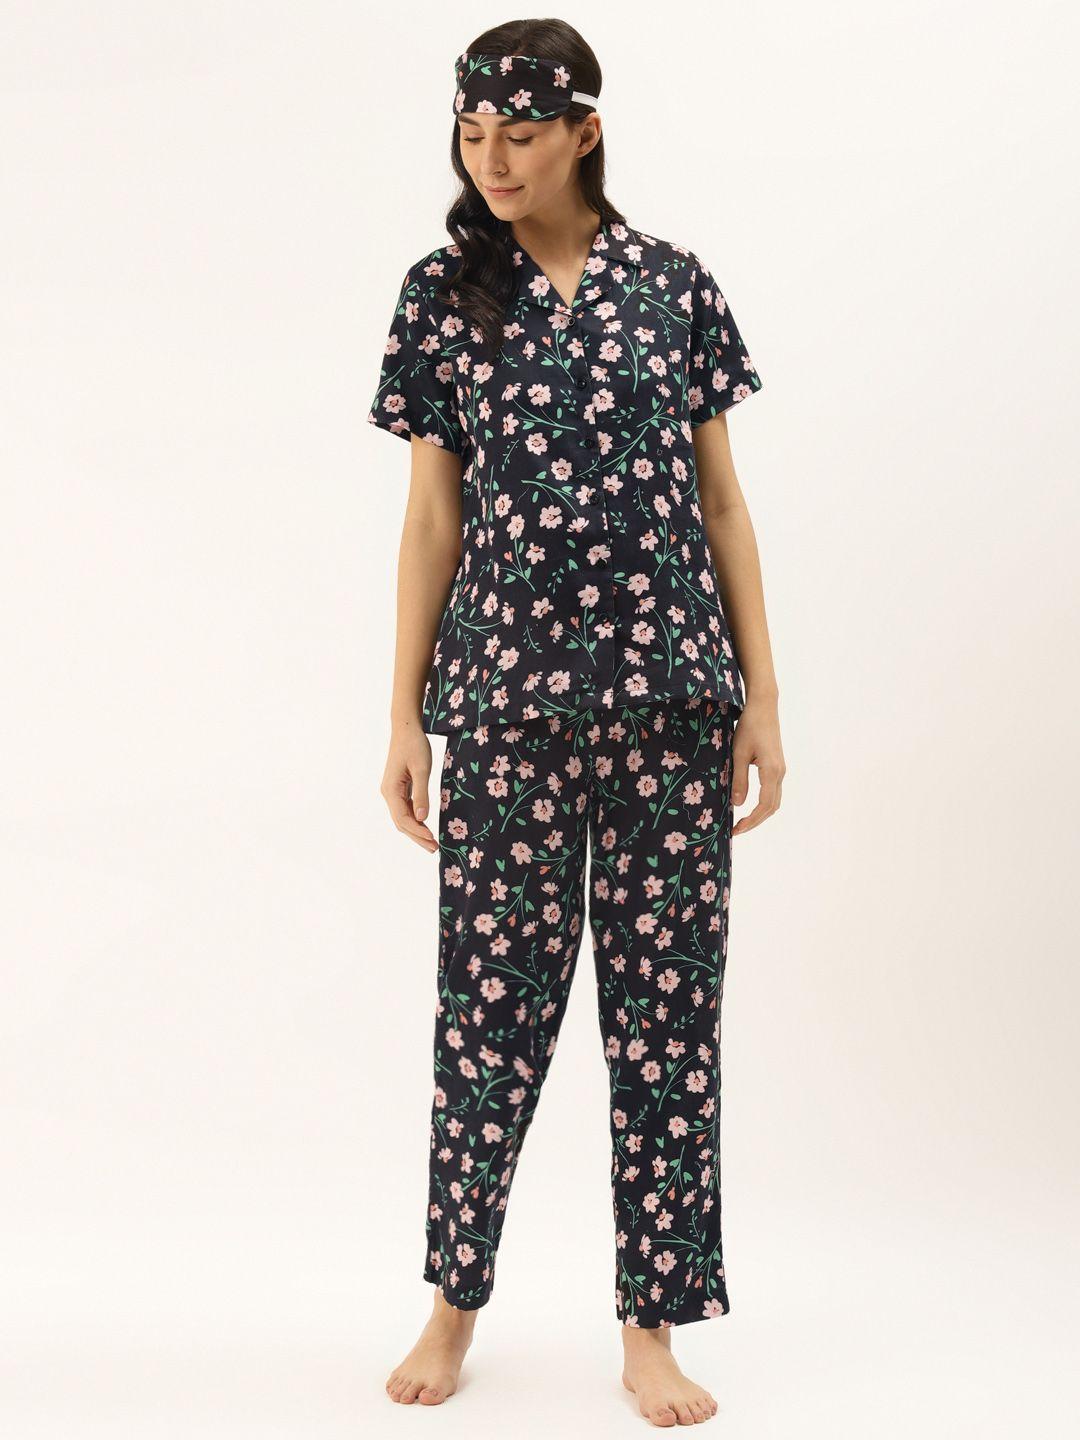 rapra the label women navy blue & pink pure cotton floral print night suit with eye mask